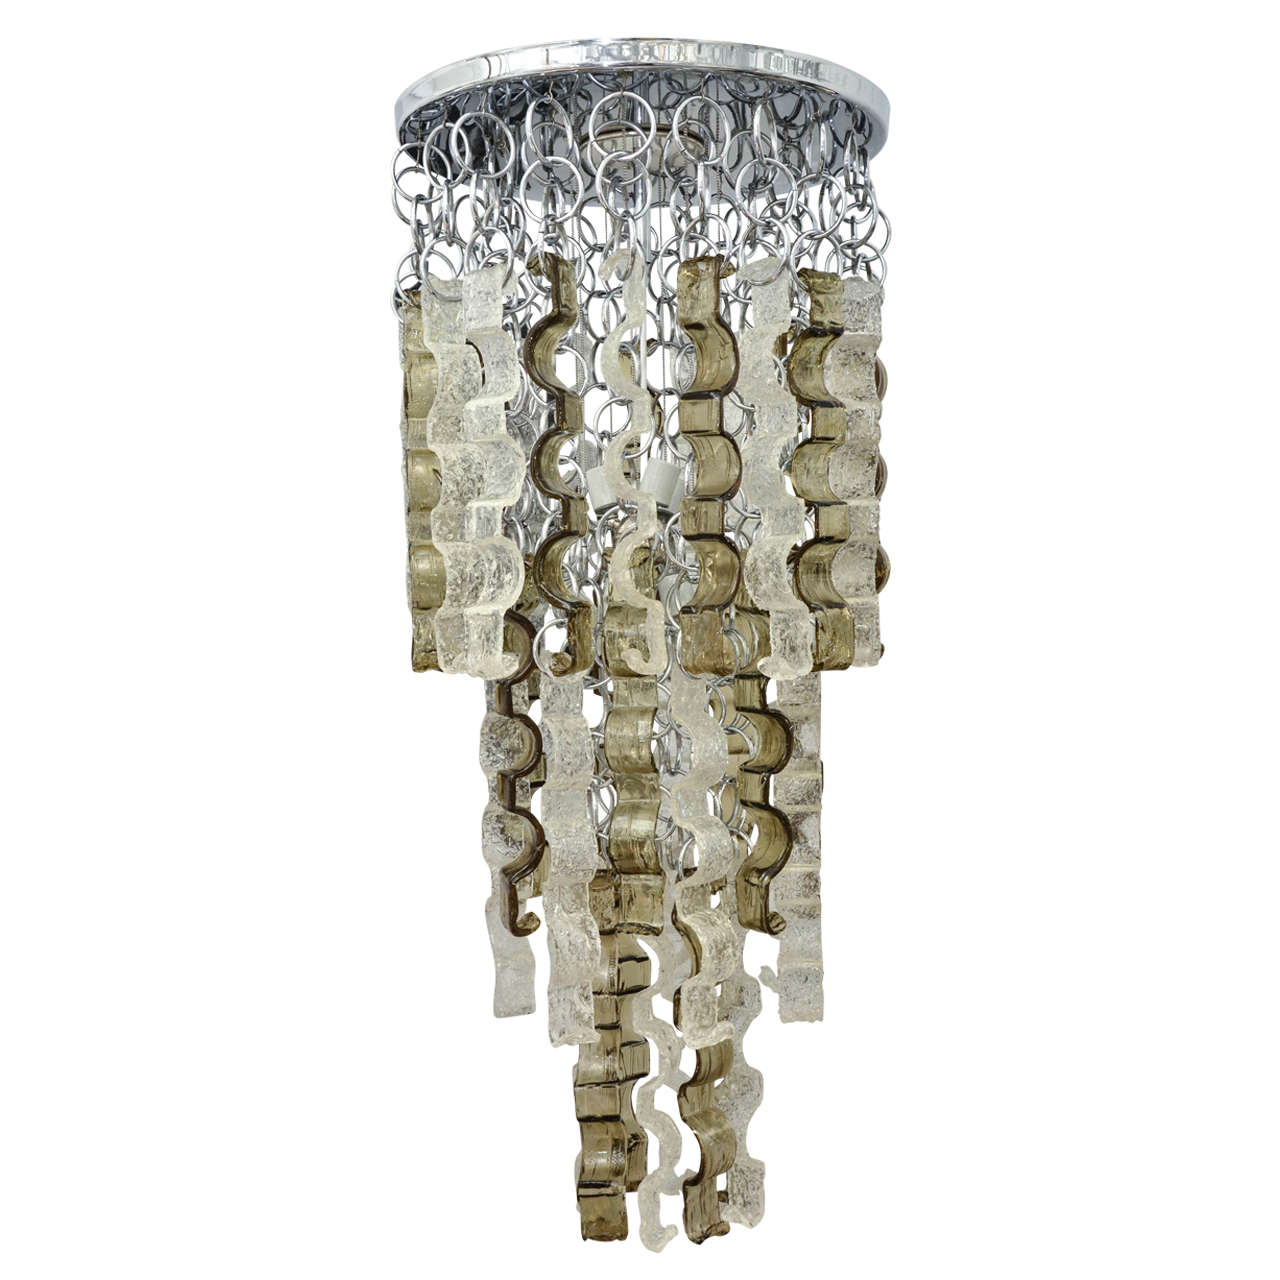 Chandelier Composed of Textured Glass Elements with Chrome Details